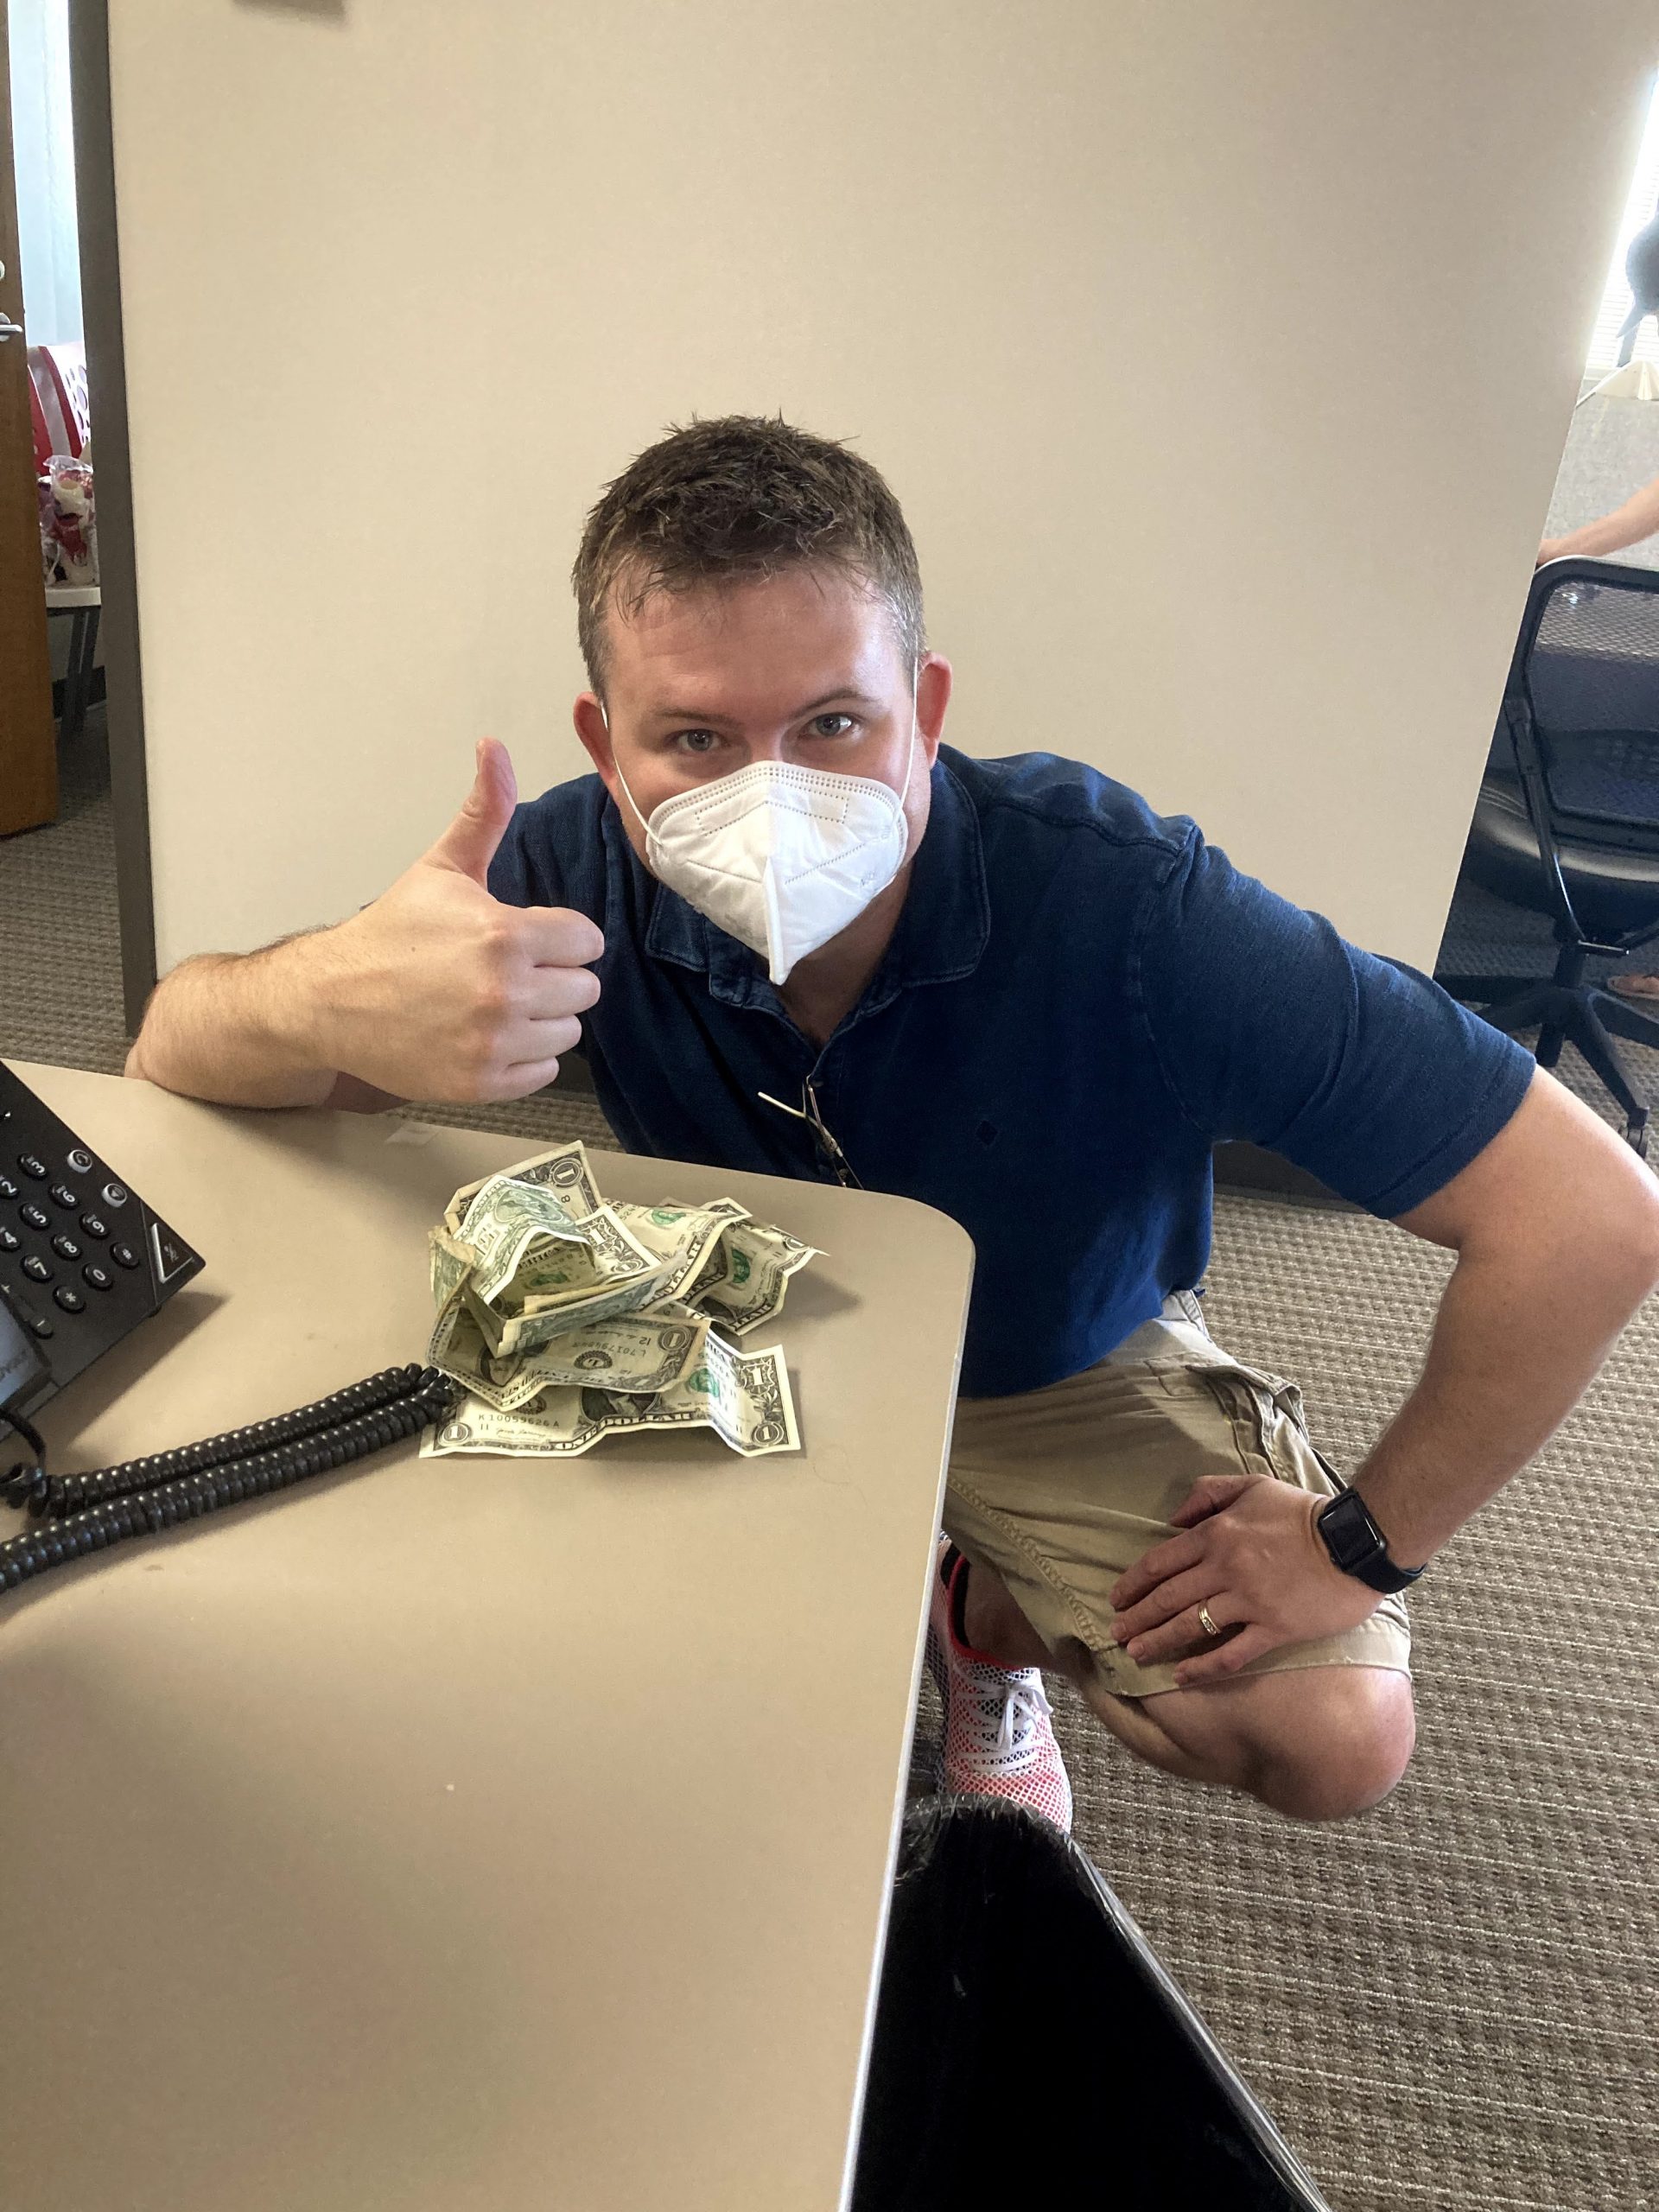 Man in mask making a thumbs up sign with hand next to a pile of dollar bills on a desk.